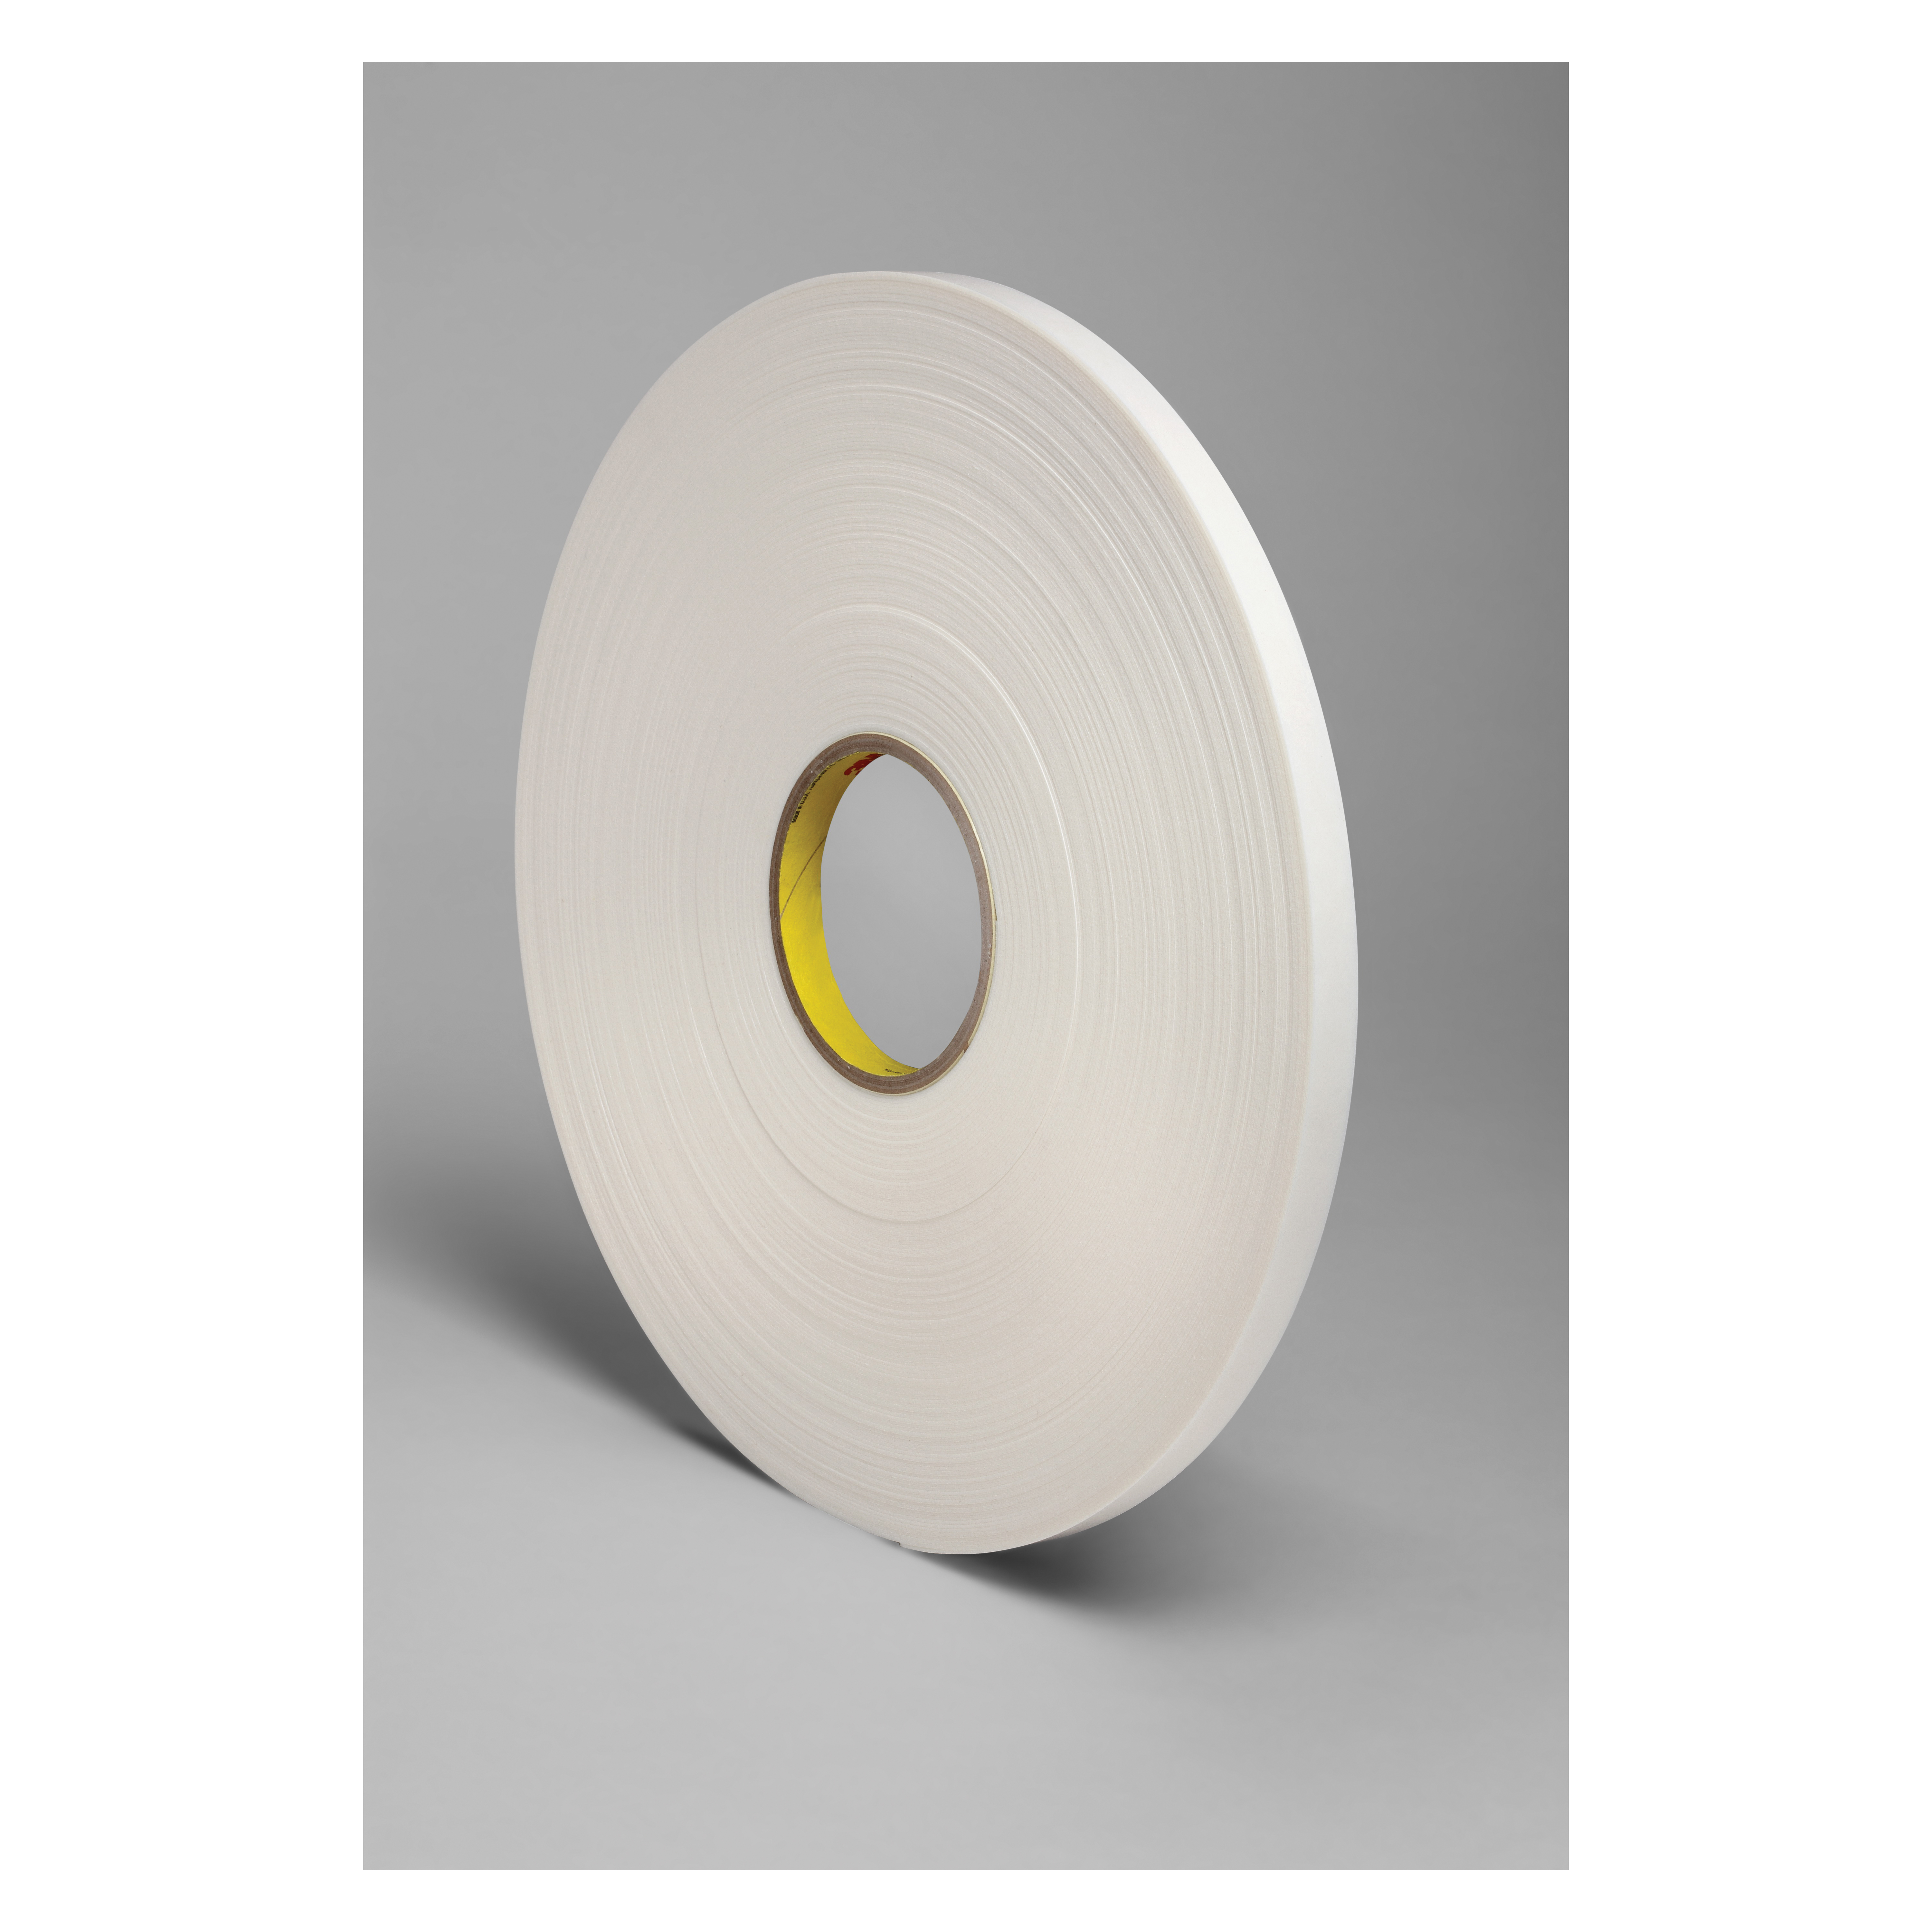 3M™ 021200-03408 Single Coated Foam Tape, 36 yd L x 1 in W, 125 mil THK, Acrylic Adhesive, Urethane Foam Backing, Natural